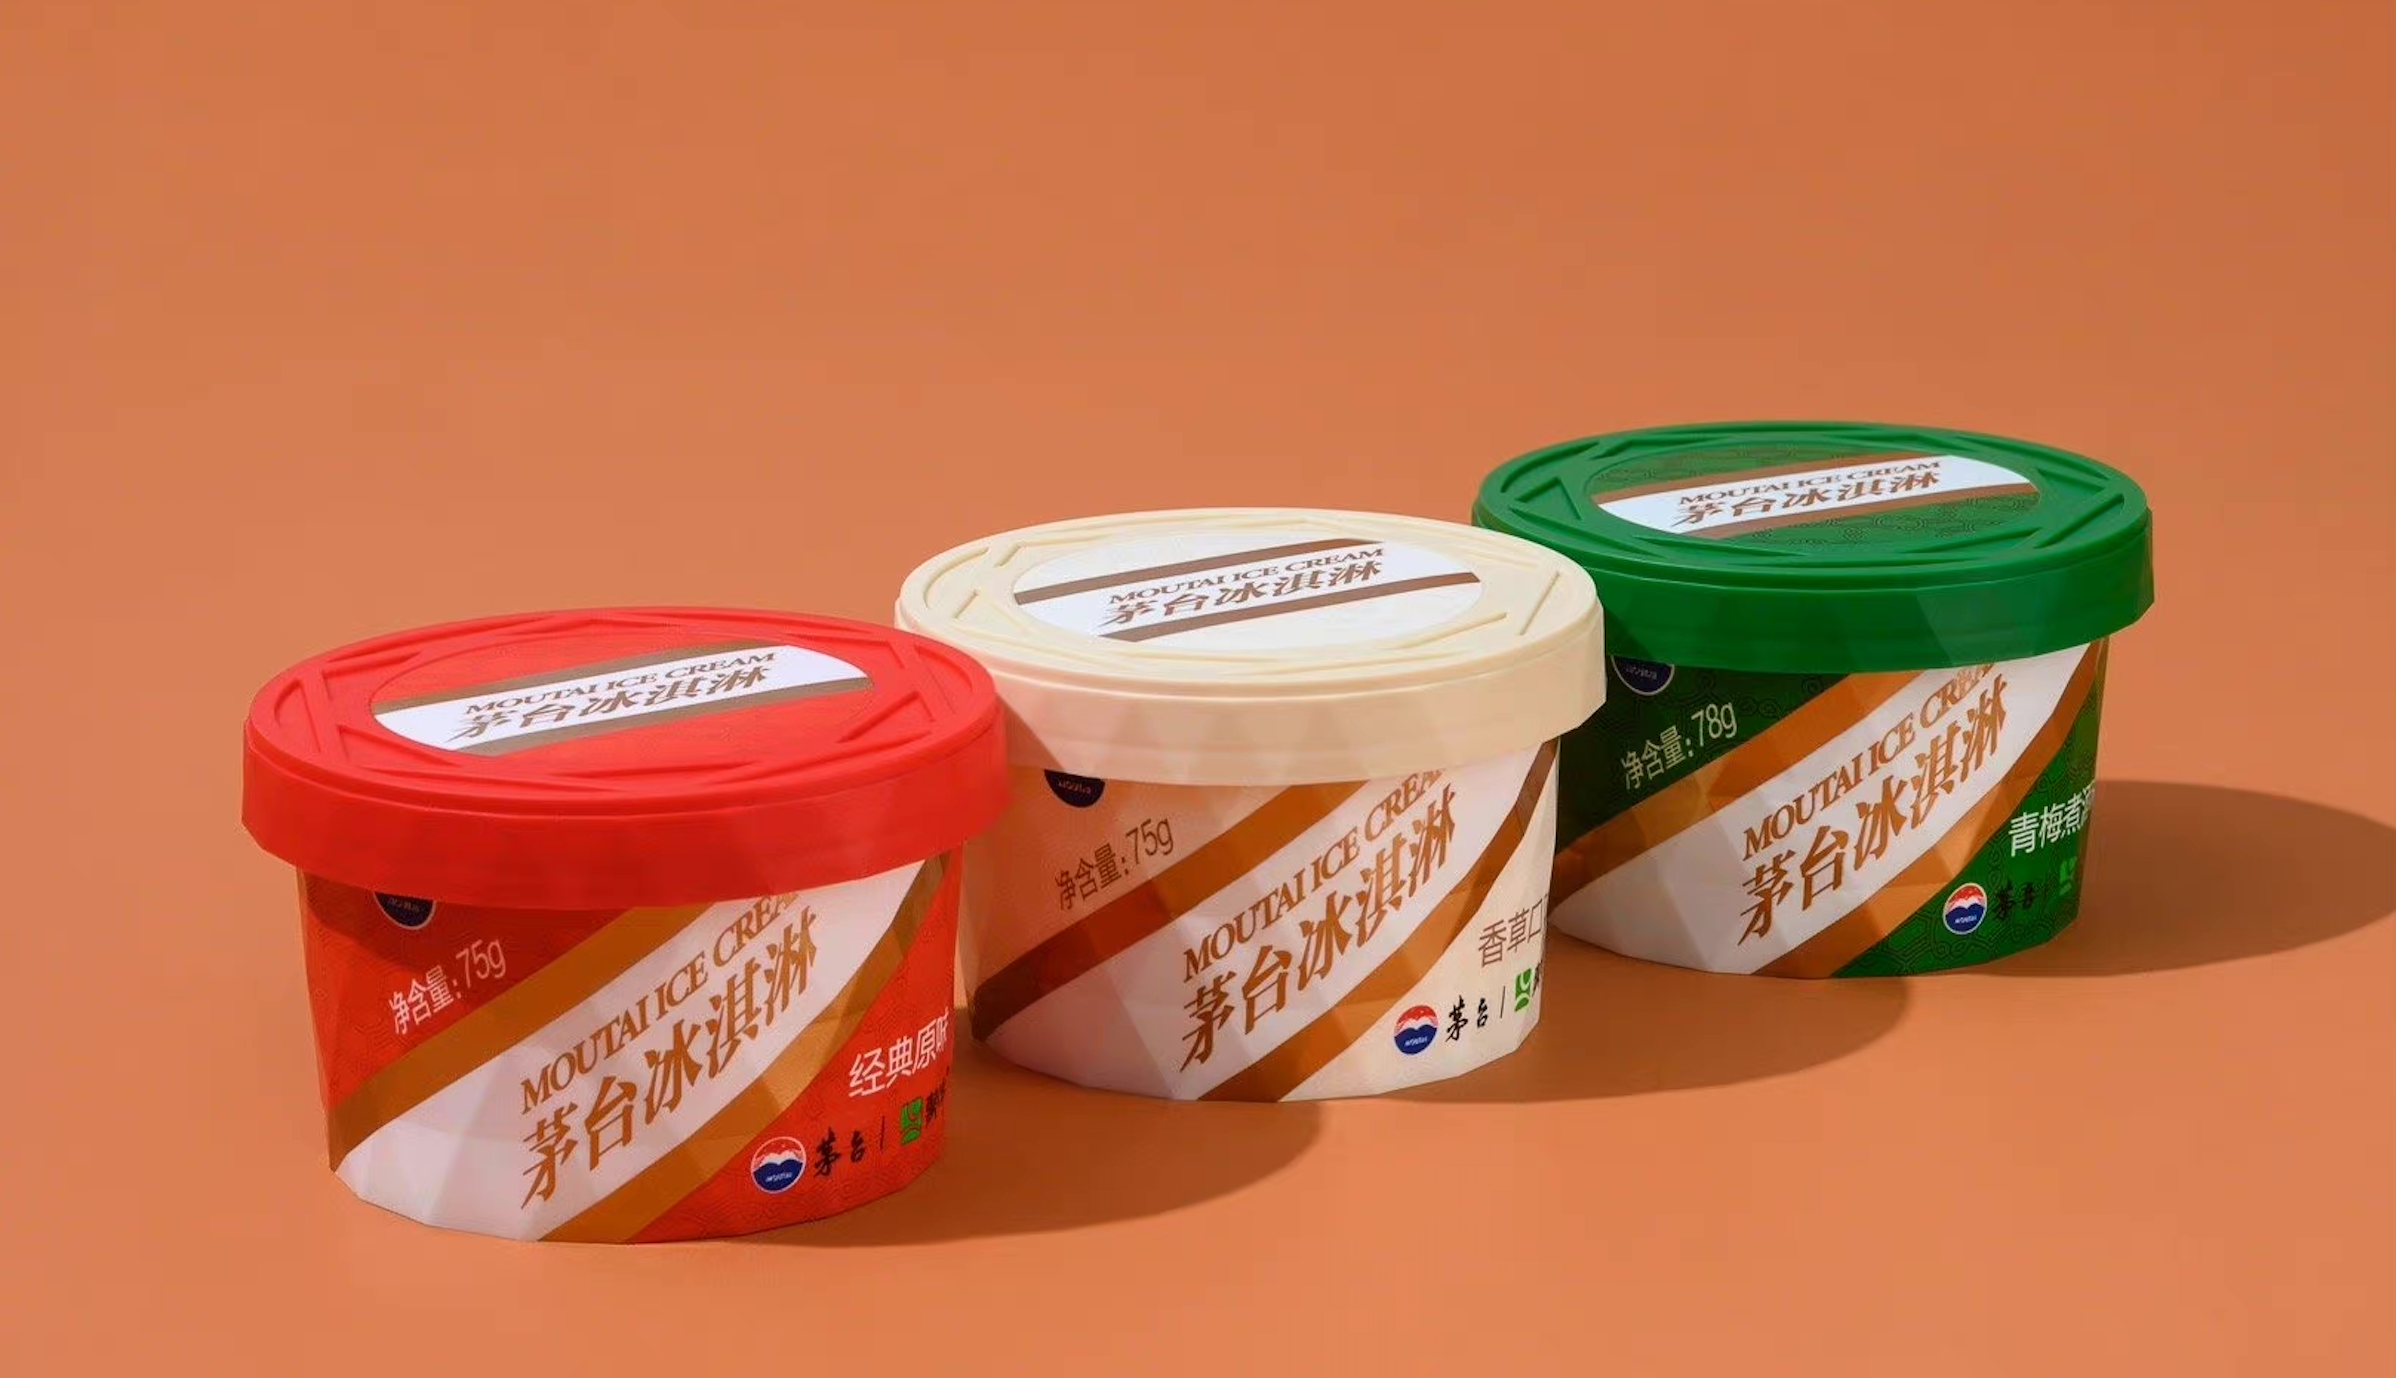 Young consumers have gone wild for the Kweichow Moutai x Mengniu Dairy liquor ice cream tie-up. Read on for more of this month’s tantalizing collaborations. Photo: Weibo
